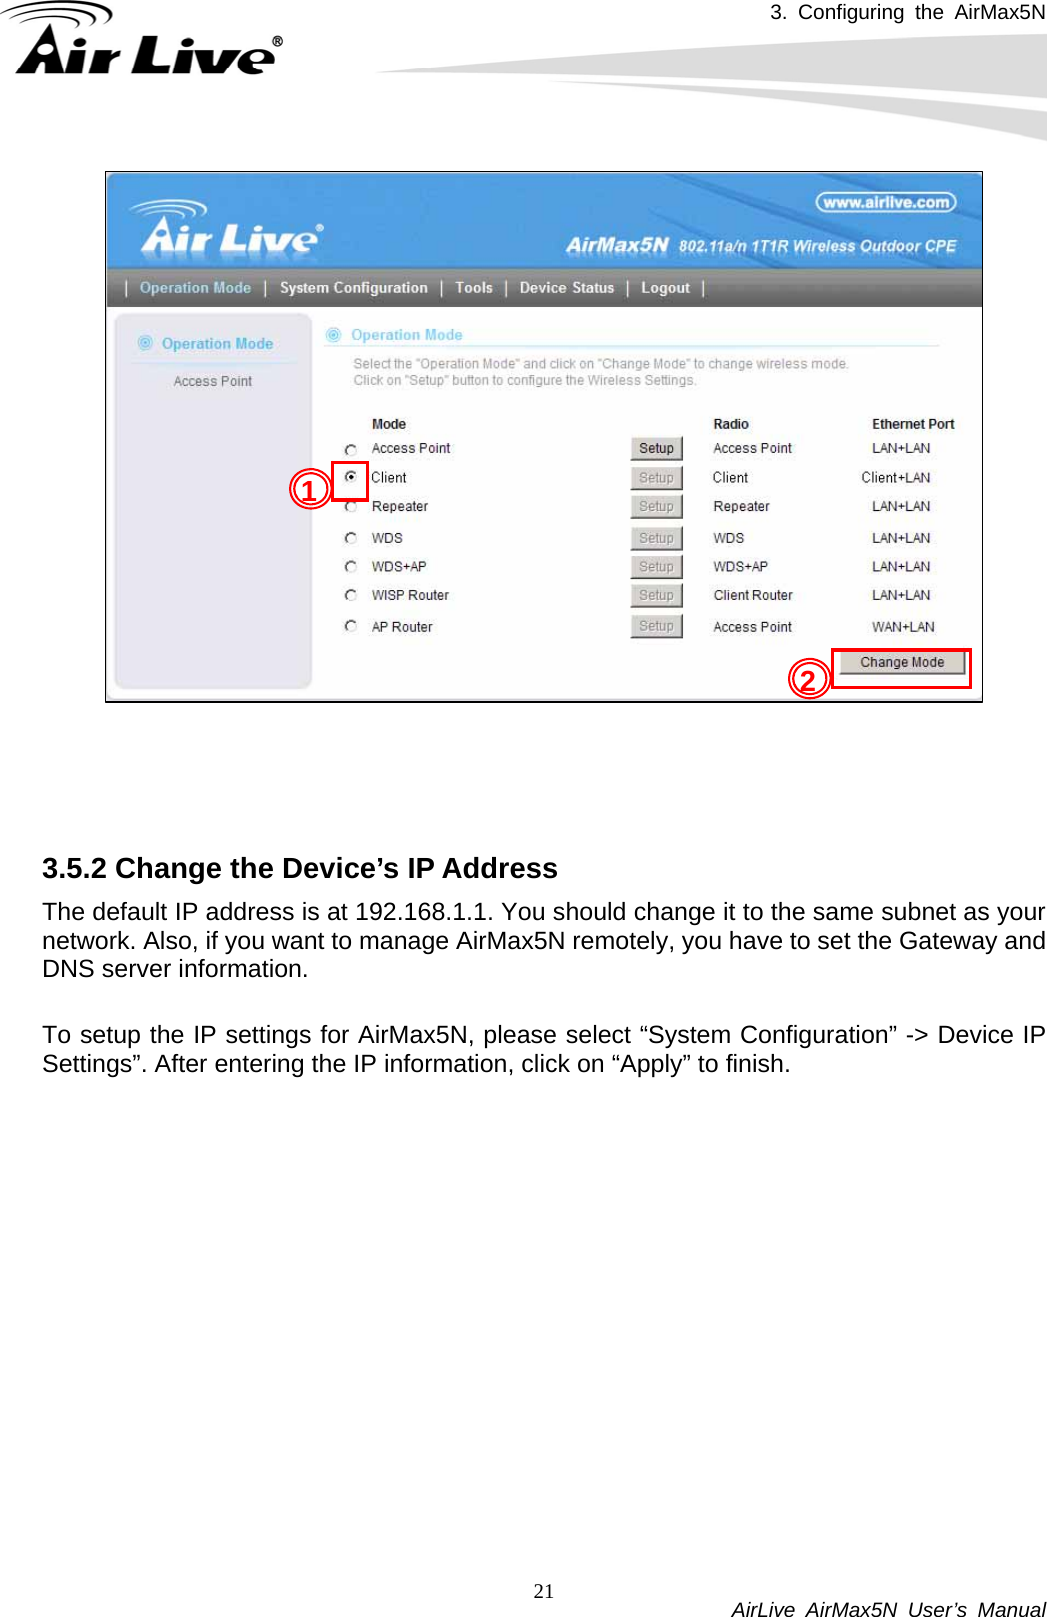 3. Configuring the AirMax5N           AirLive AirMax5N User’s Manual 21    3.5.2 Change the Device’s IP Address   The default IP address is at 192.168.1.1. You should change it to the same subnet as your network. Also, if you want to manage AirMax5N remotely, you have to set the Gateway and DNS server information.  To setup the IP settings for AirMax5N, please select “System Configuration” -&gt; Device IP Settings”. After entering the IP information, click on “Apply” to finish. 2 1 